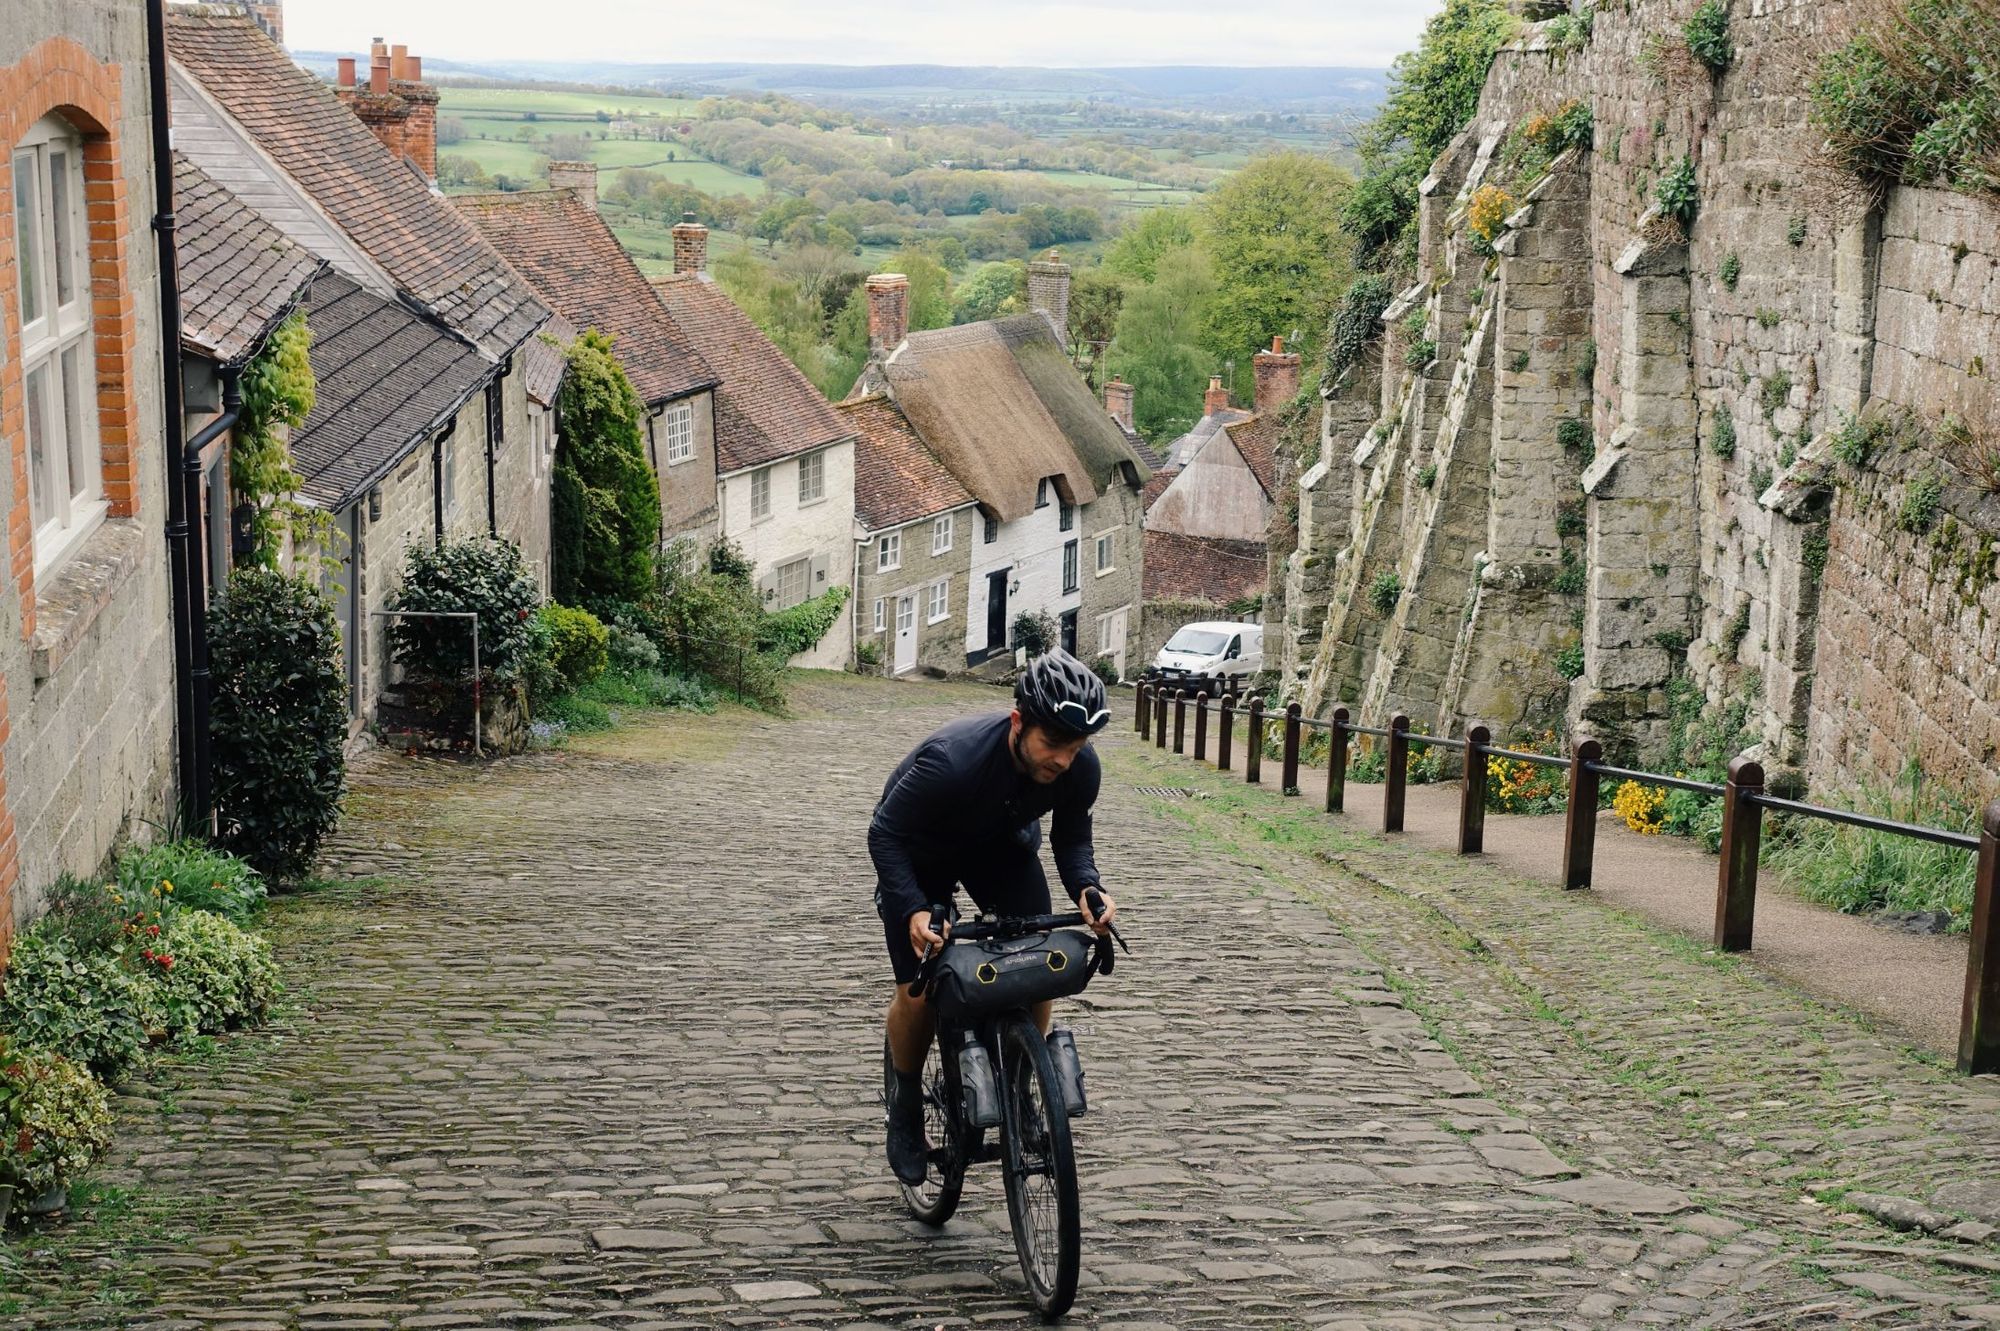 The fierce uphill on the cobblestones, climbing Shaftesbury’s Gold Hill on the Old Chalk Way. Photo: Ben Wormald / Old Chalk Way